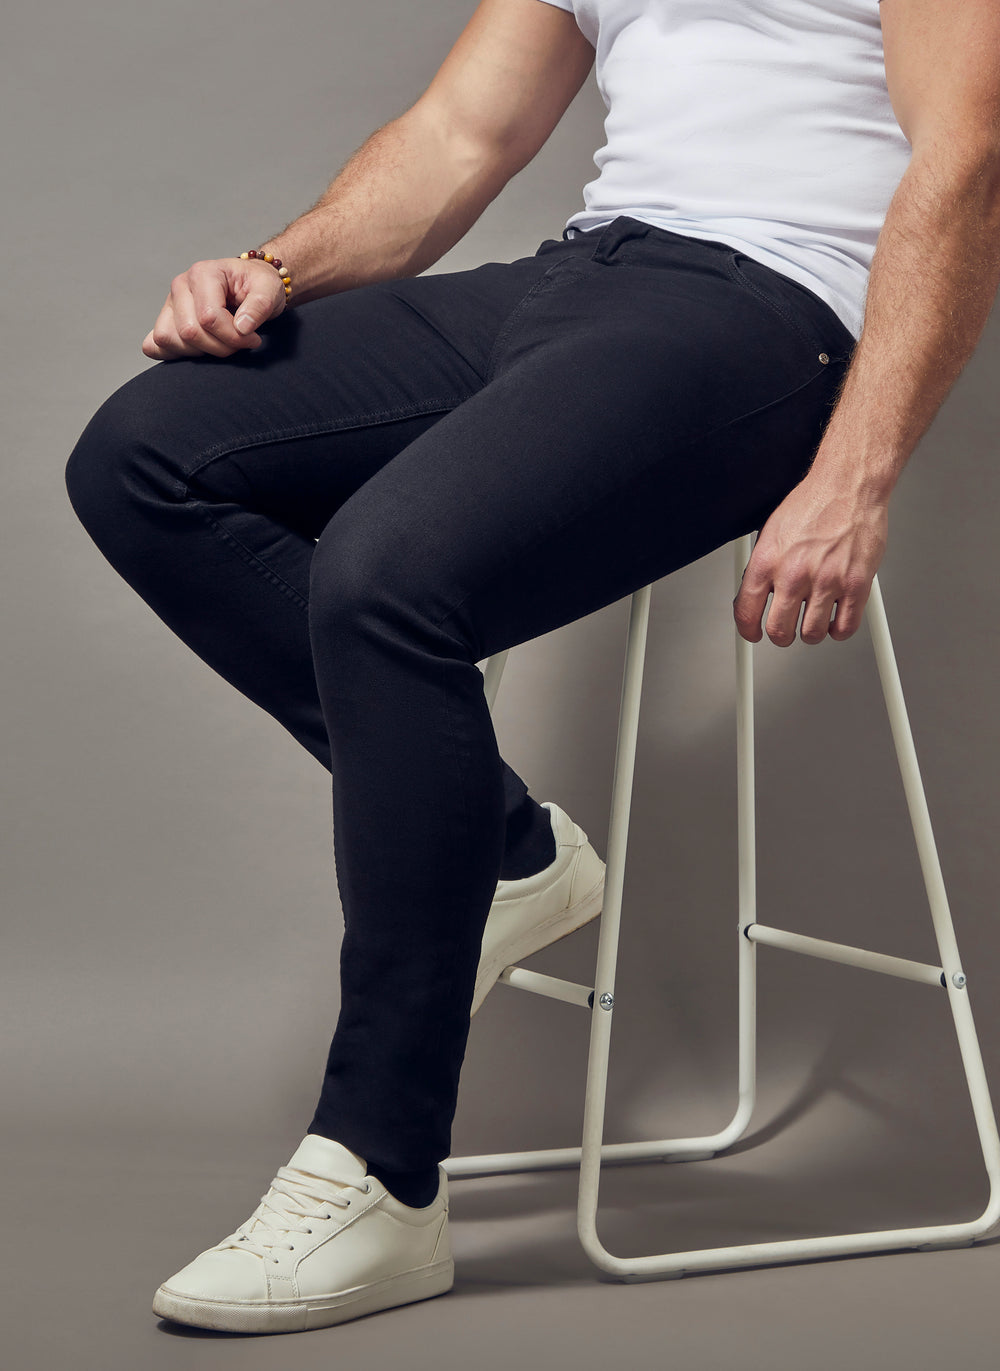 black tapered fit jeans, showcasing the muscle fit and superior quality offered by Tapered Menswear for the discerning man